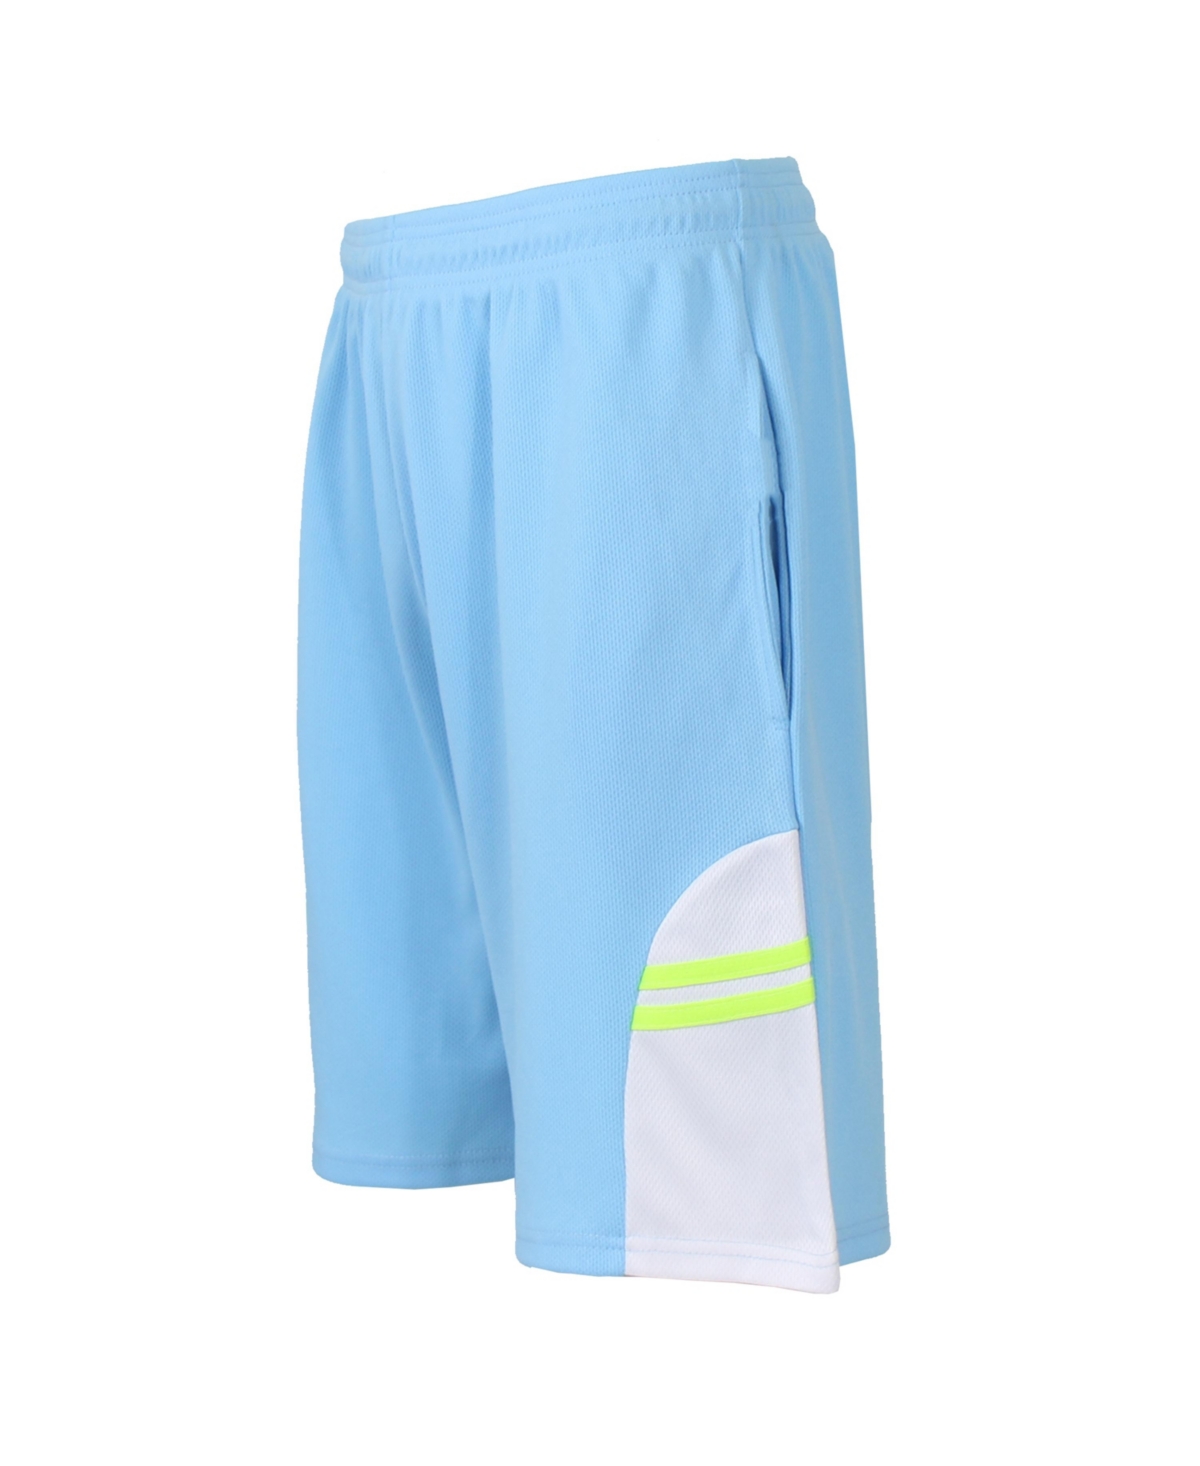 Galaxy By Harvic Men's Moisture Wicking Shorts With Side Trim Design In Light Blue